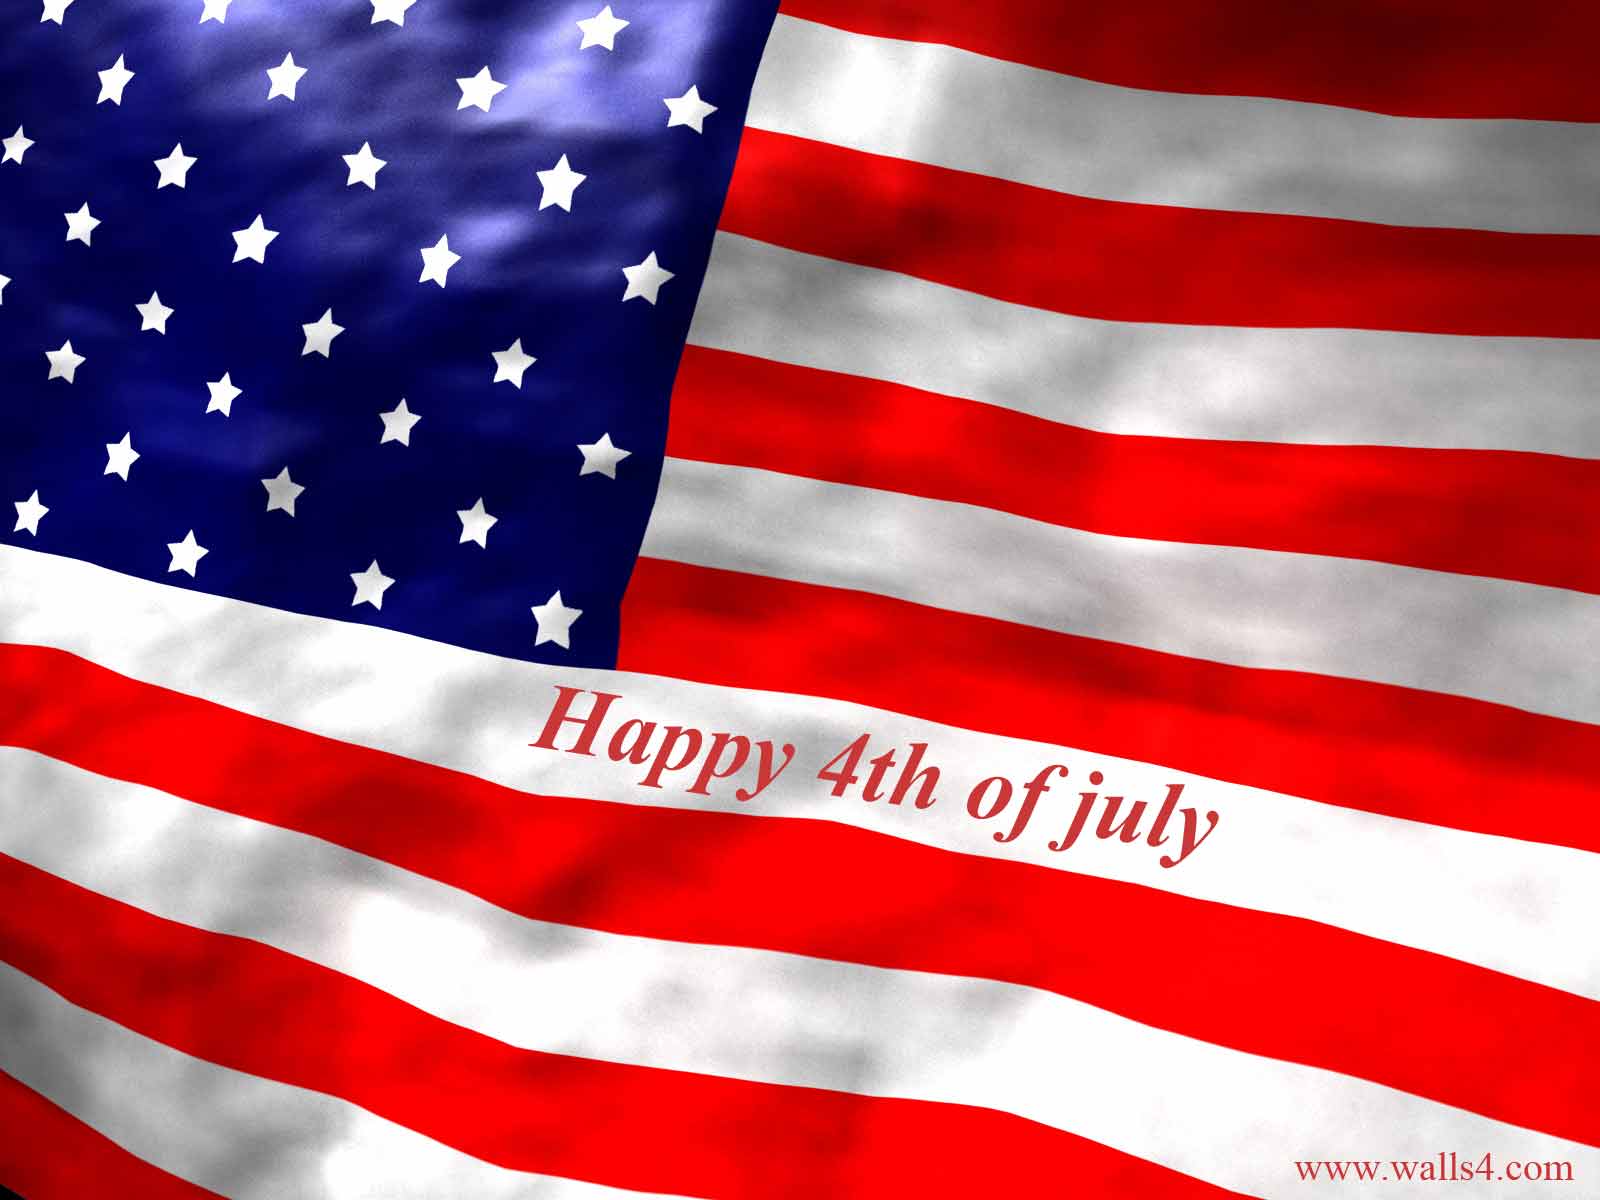 Most popular 15 4th of july wallpaper latest Update